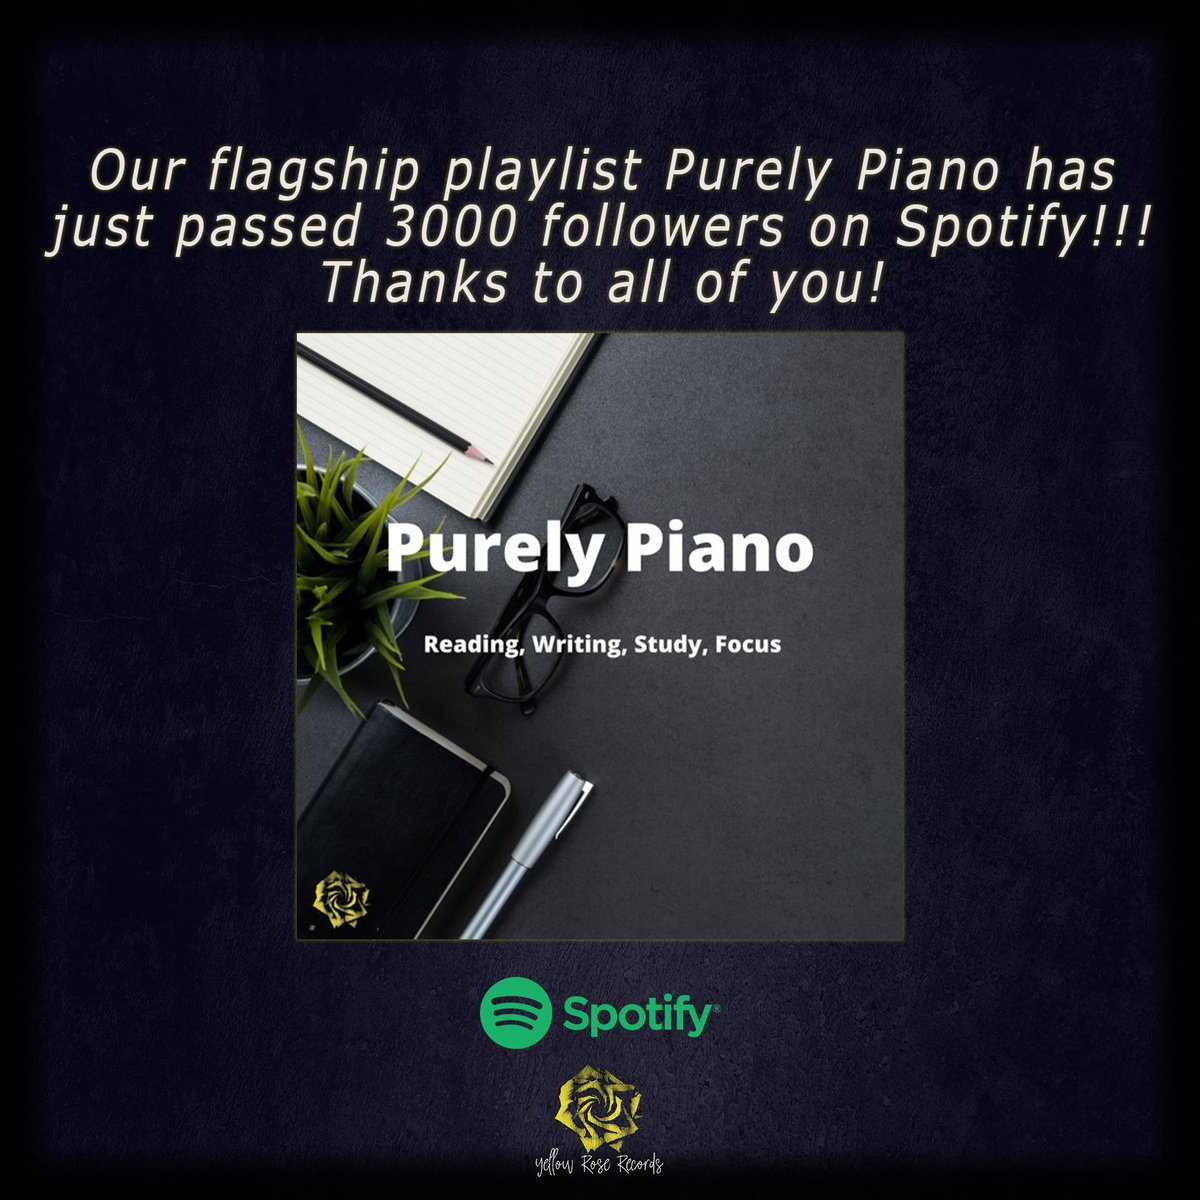 Our flagship playlist Purely Piano has just passed 3000 followers on Spotify!!! Thanks to all of you! Check it out here: open.spotify.com/playlist/6qtnq…